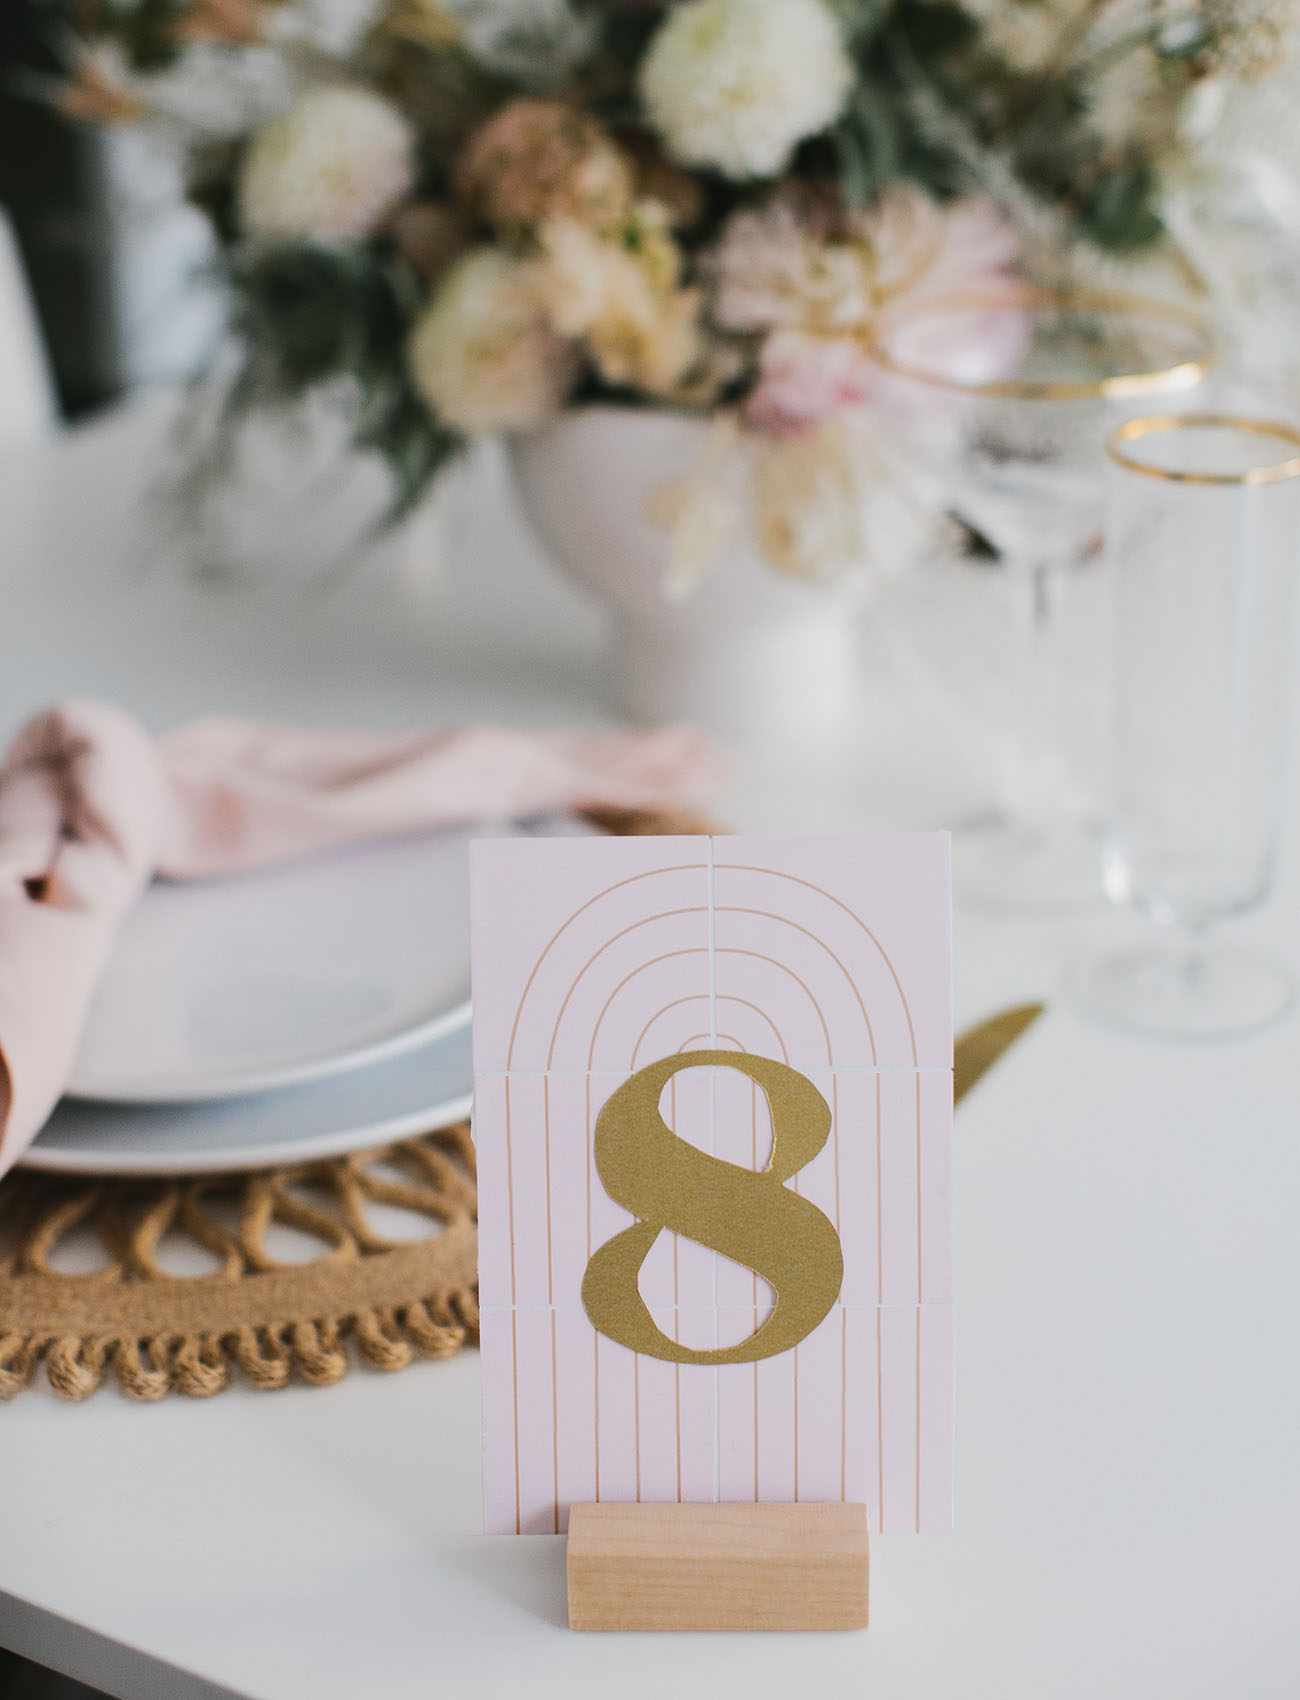 DIY Faux Tiled Table Number